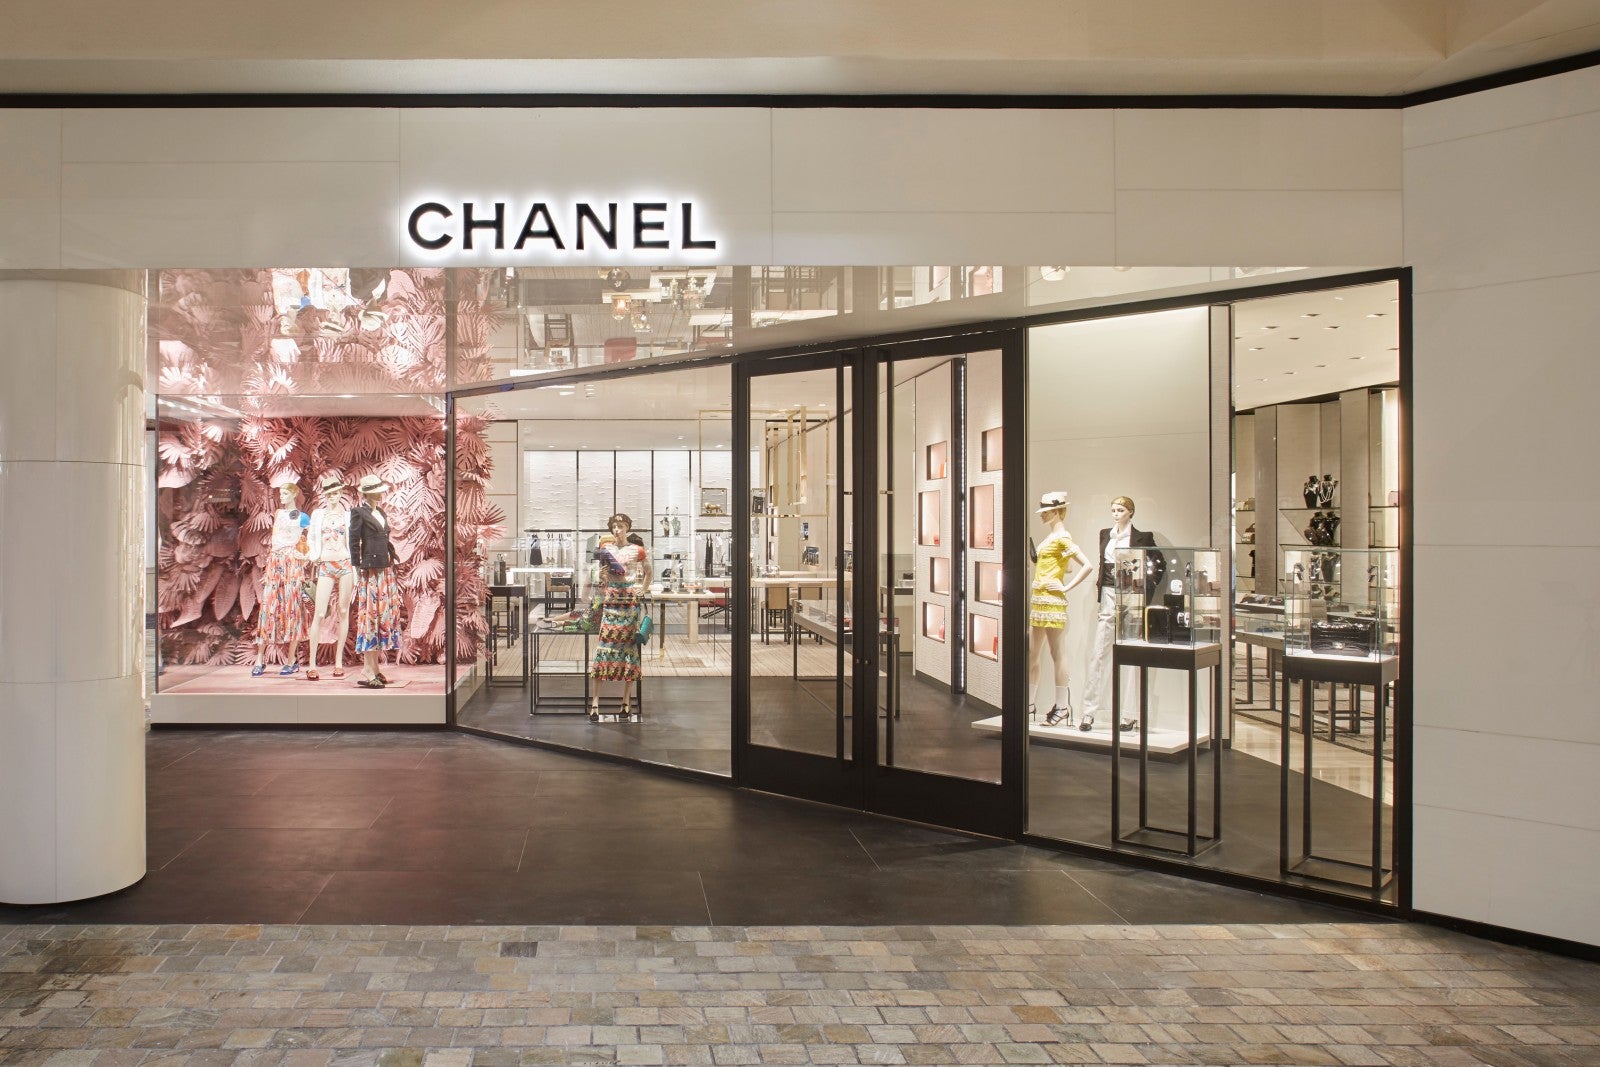 Fake Chanel Goods Were Being Sold At Original Prices At A Boutique In Bukit Bintang - World Of Buzz